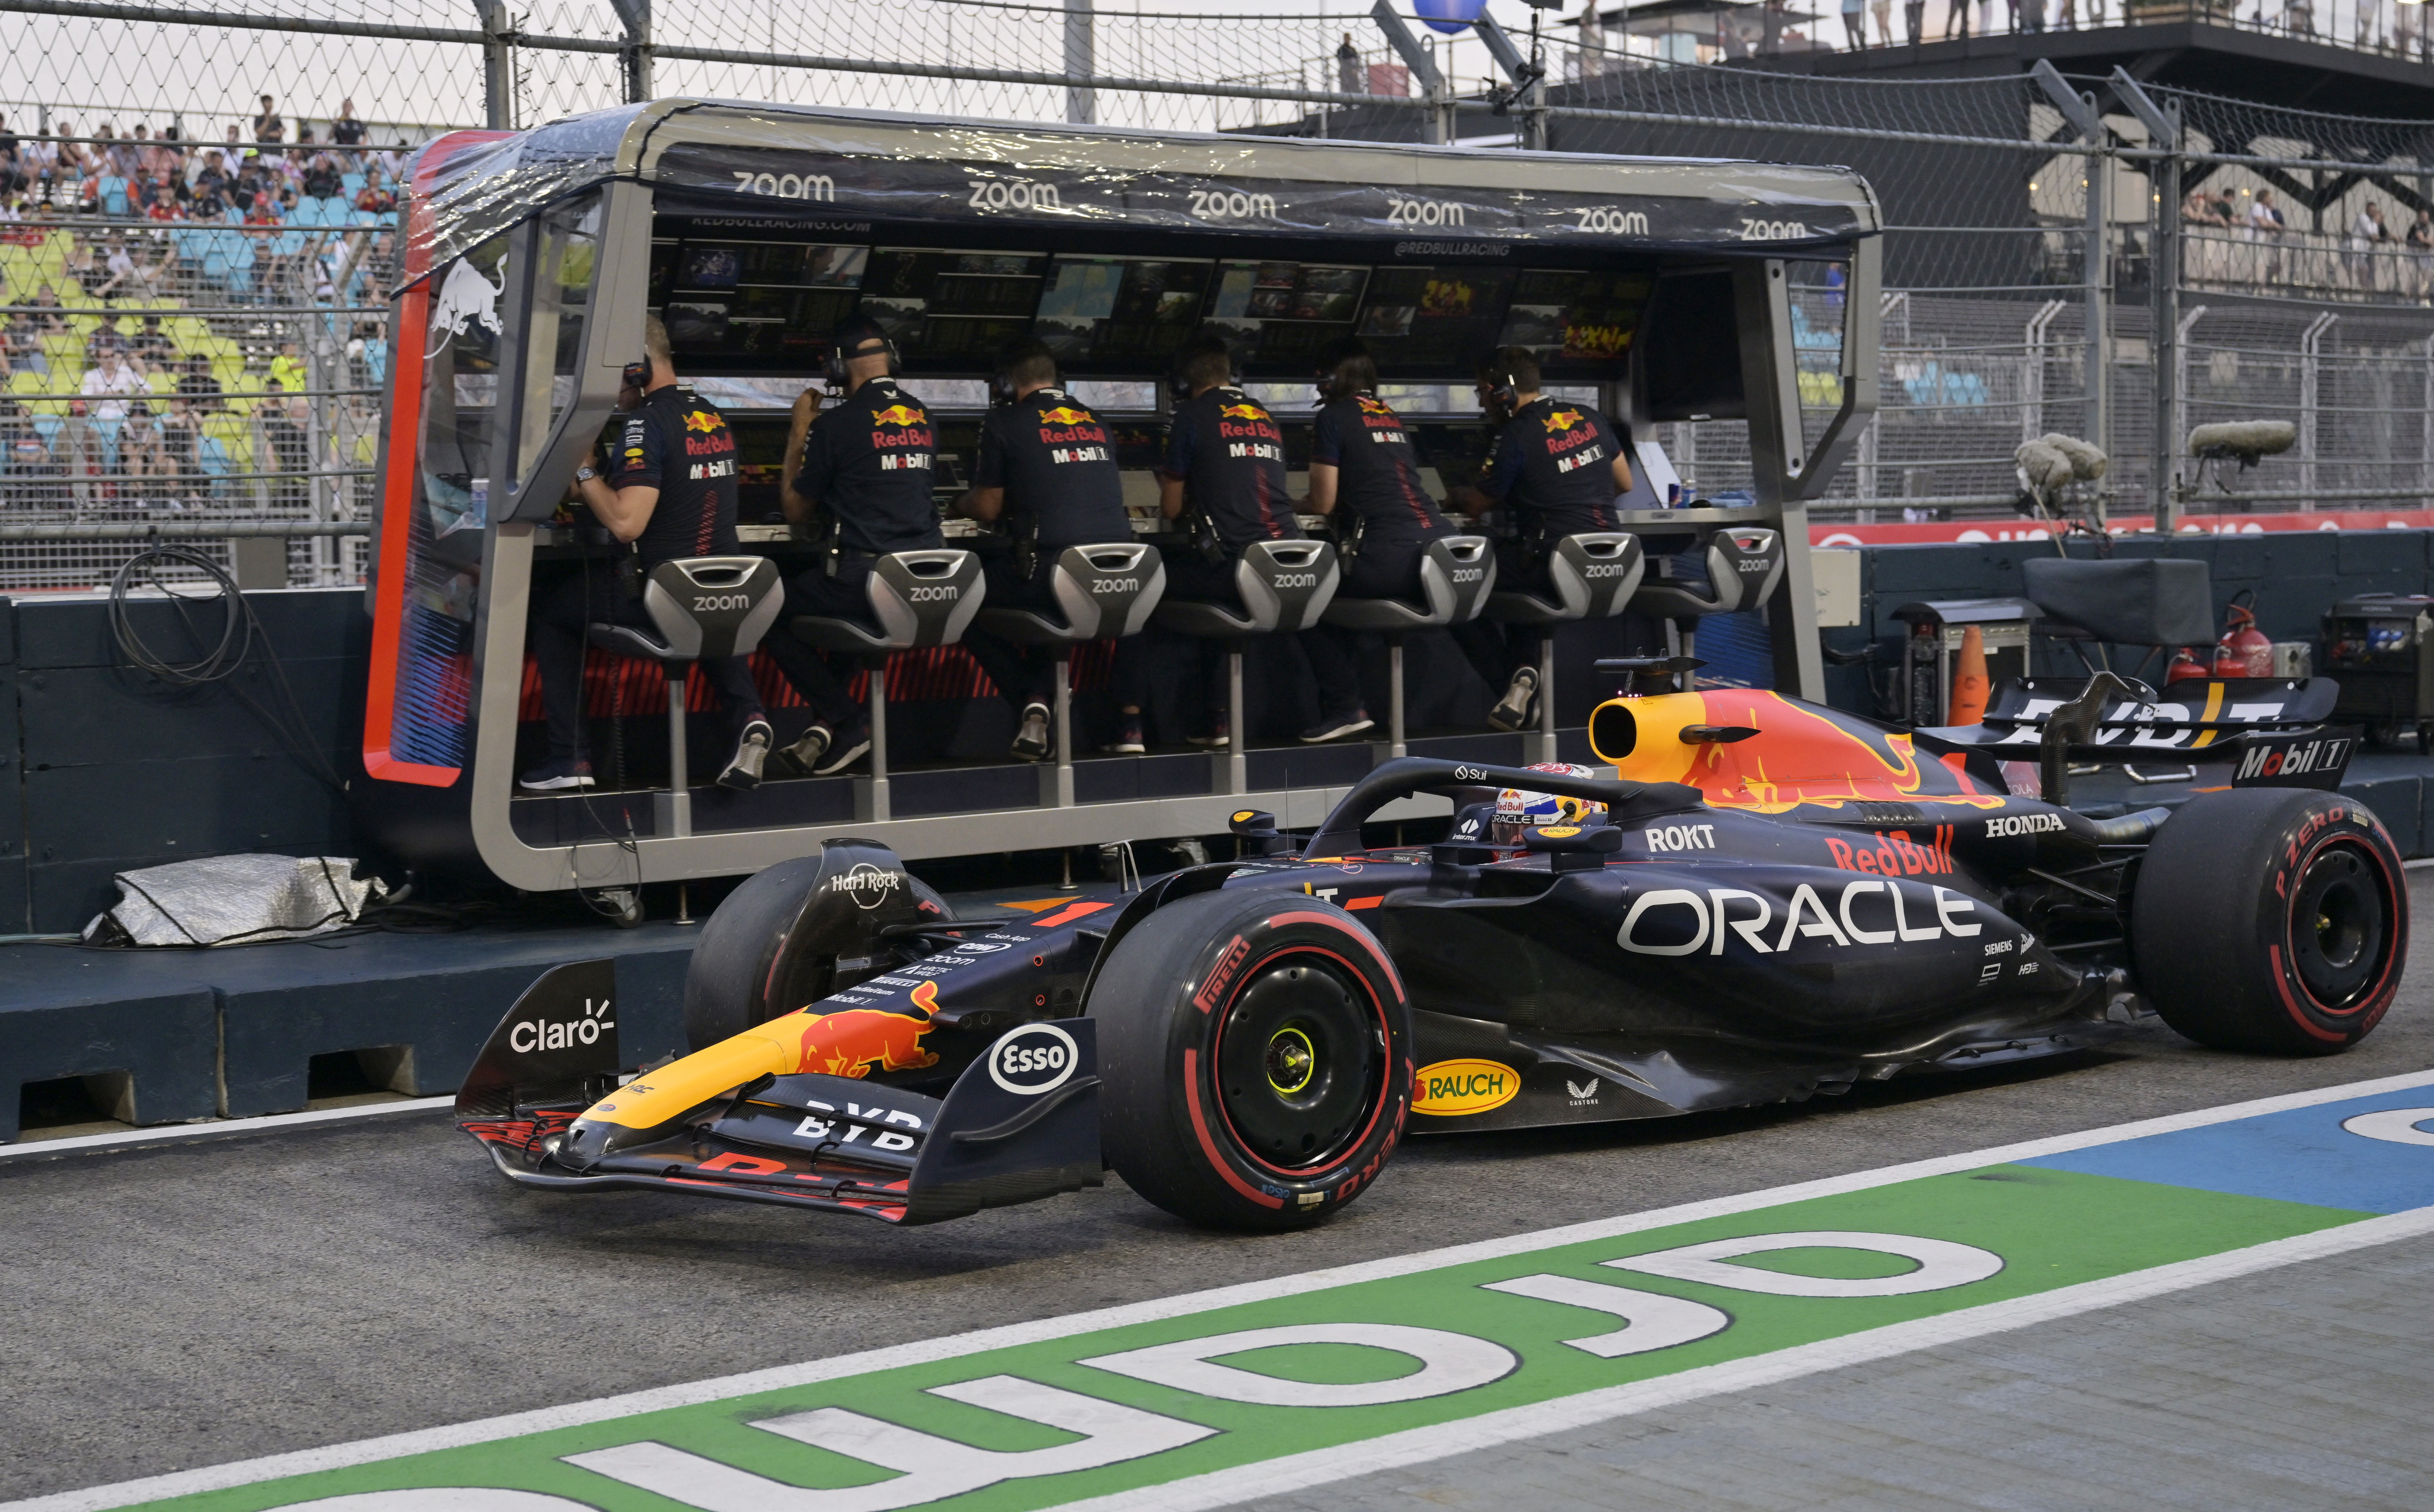 Forget about victory, says Verstappen after Saturday shocker Reuters